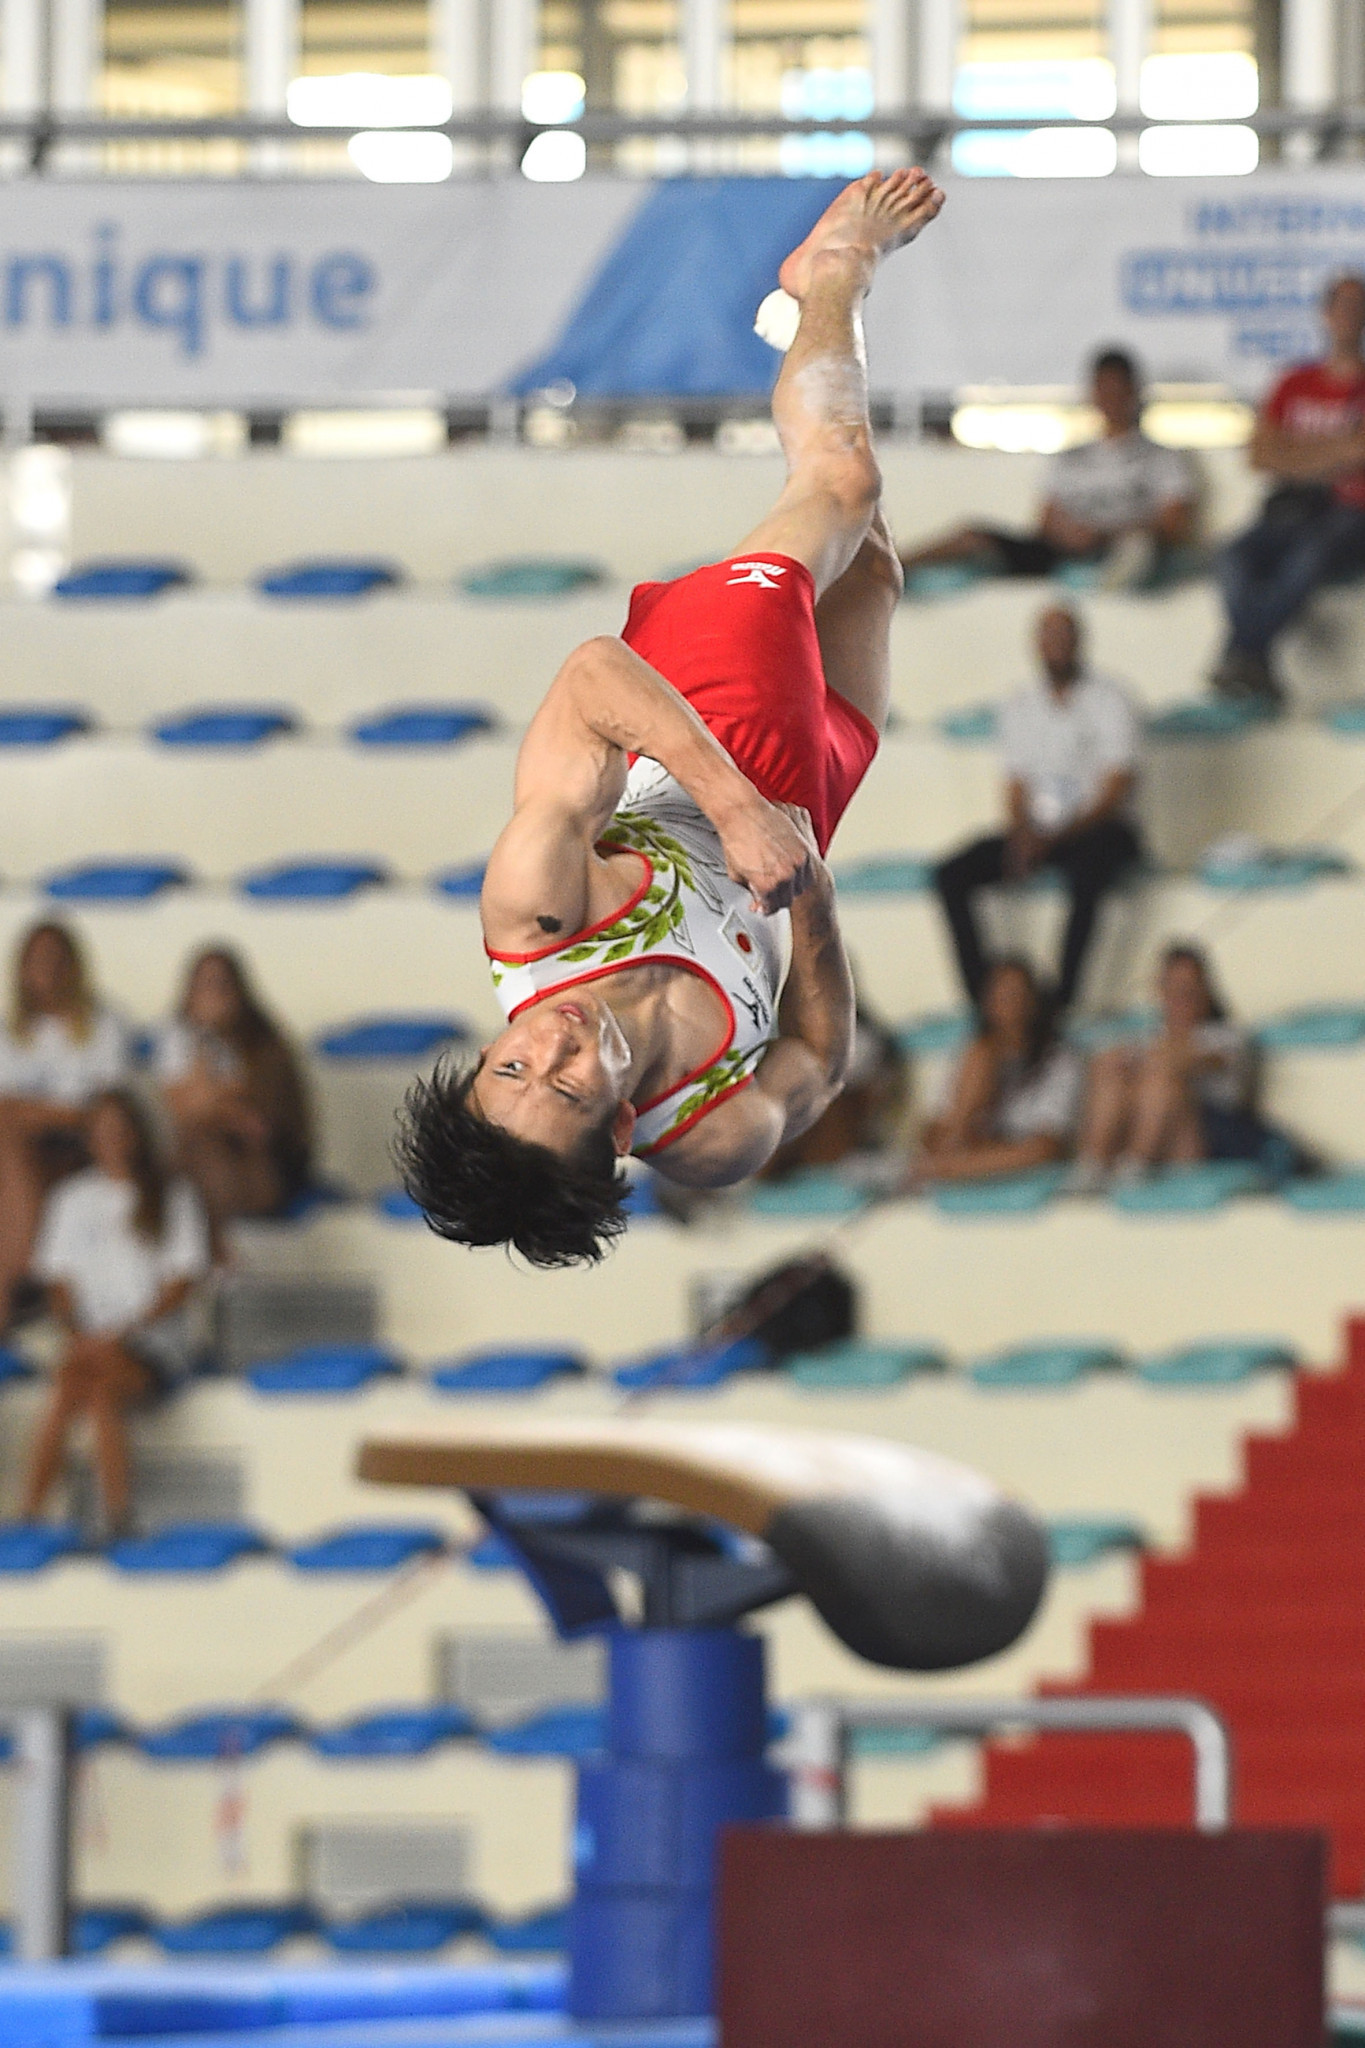 Kazuma Kaya of Japan impressed the judges as he tumbled his way to the men's all-around artistic gymnastics title ©Naples 2019